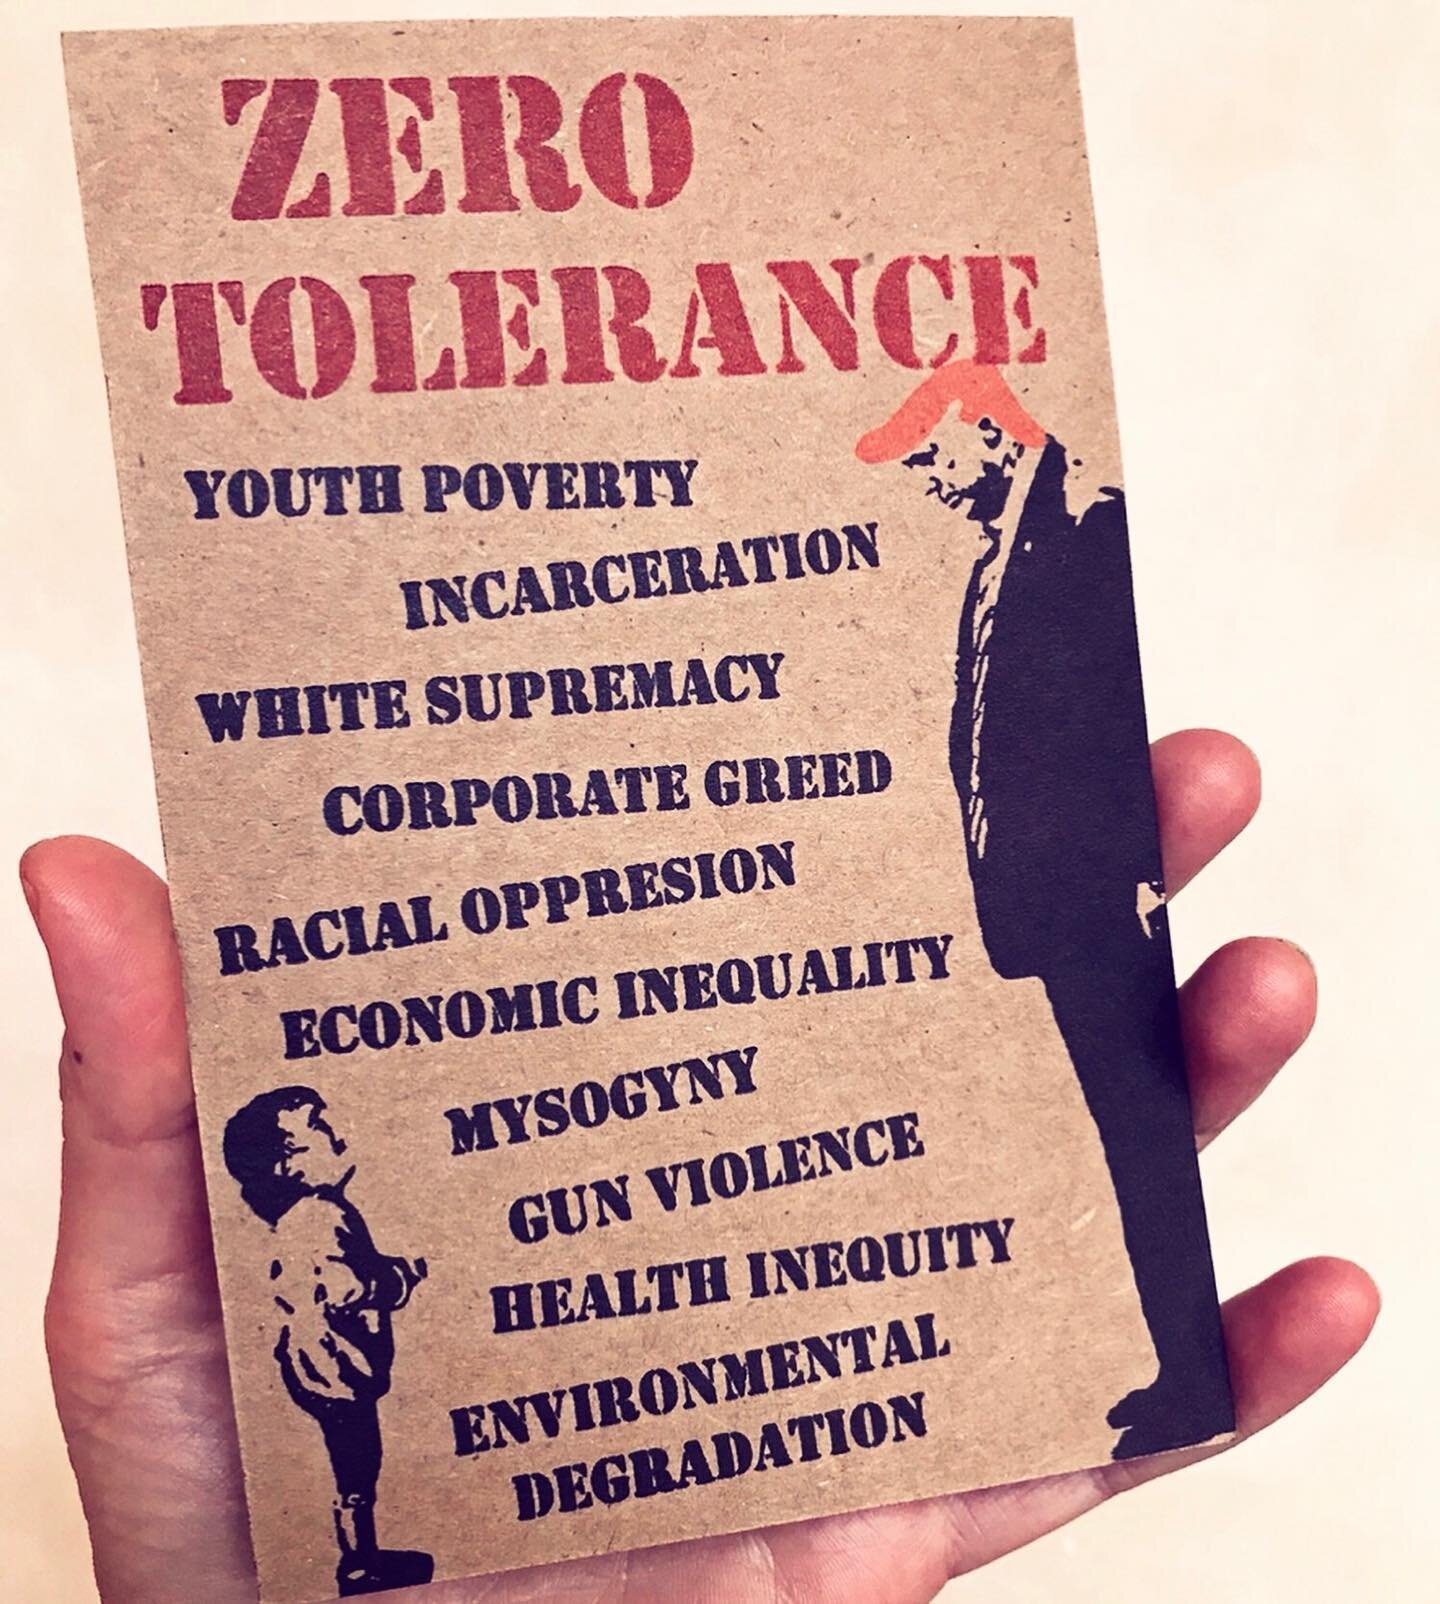 &ldquo;Zero Tolerance&rdquo; by Moira Garcia @moira.garcia.art
postcard handprinted on the letterpress and available by donation at @moira.garcia.art 
references Trump's 2018 immigration policy and illustrates the abominable ways in which the USA ran